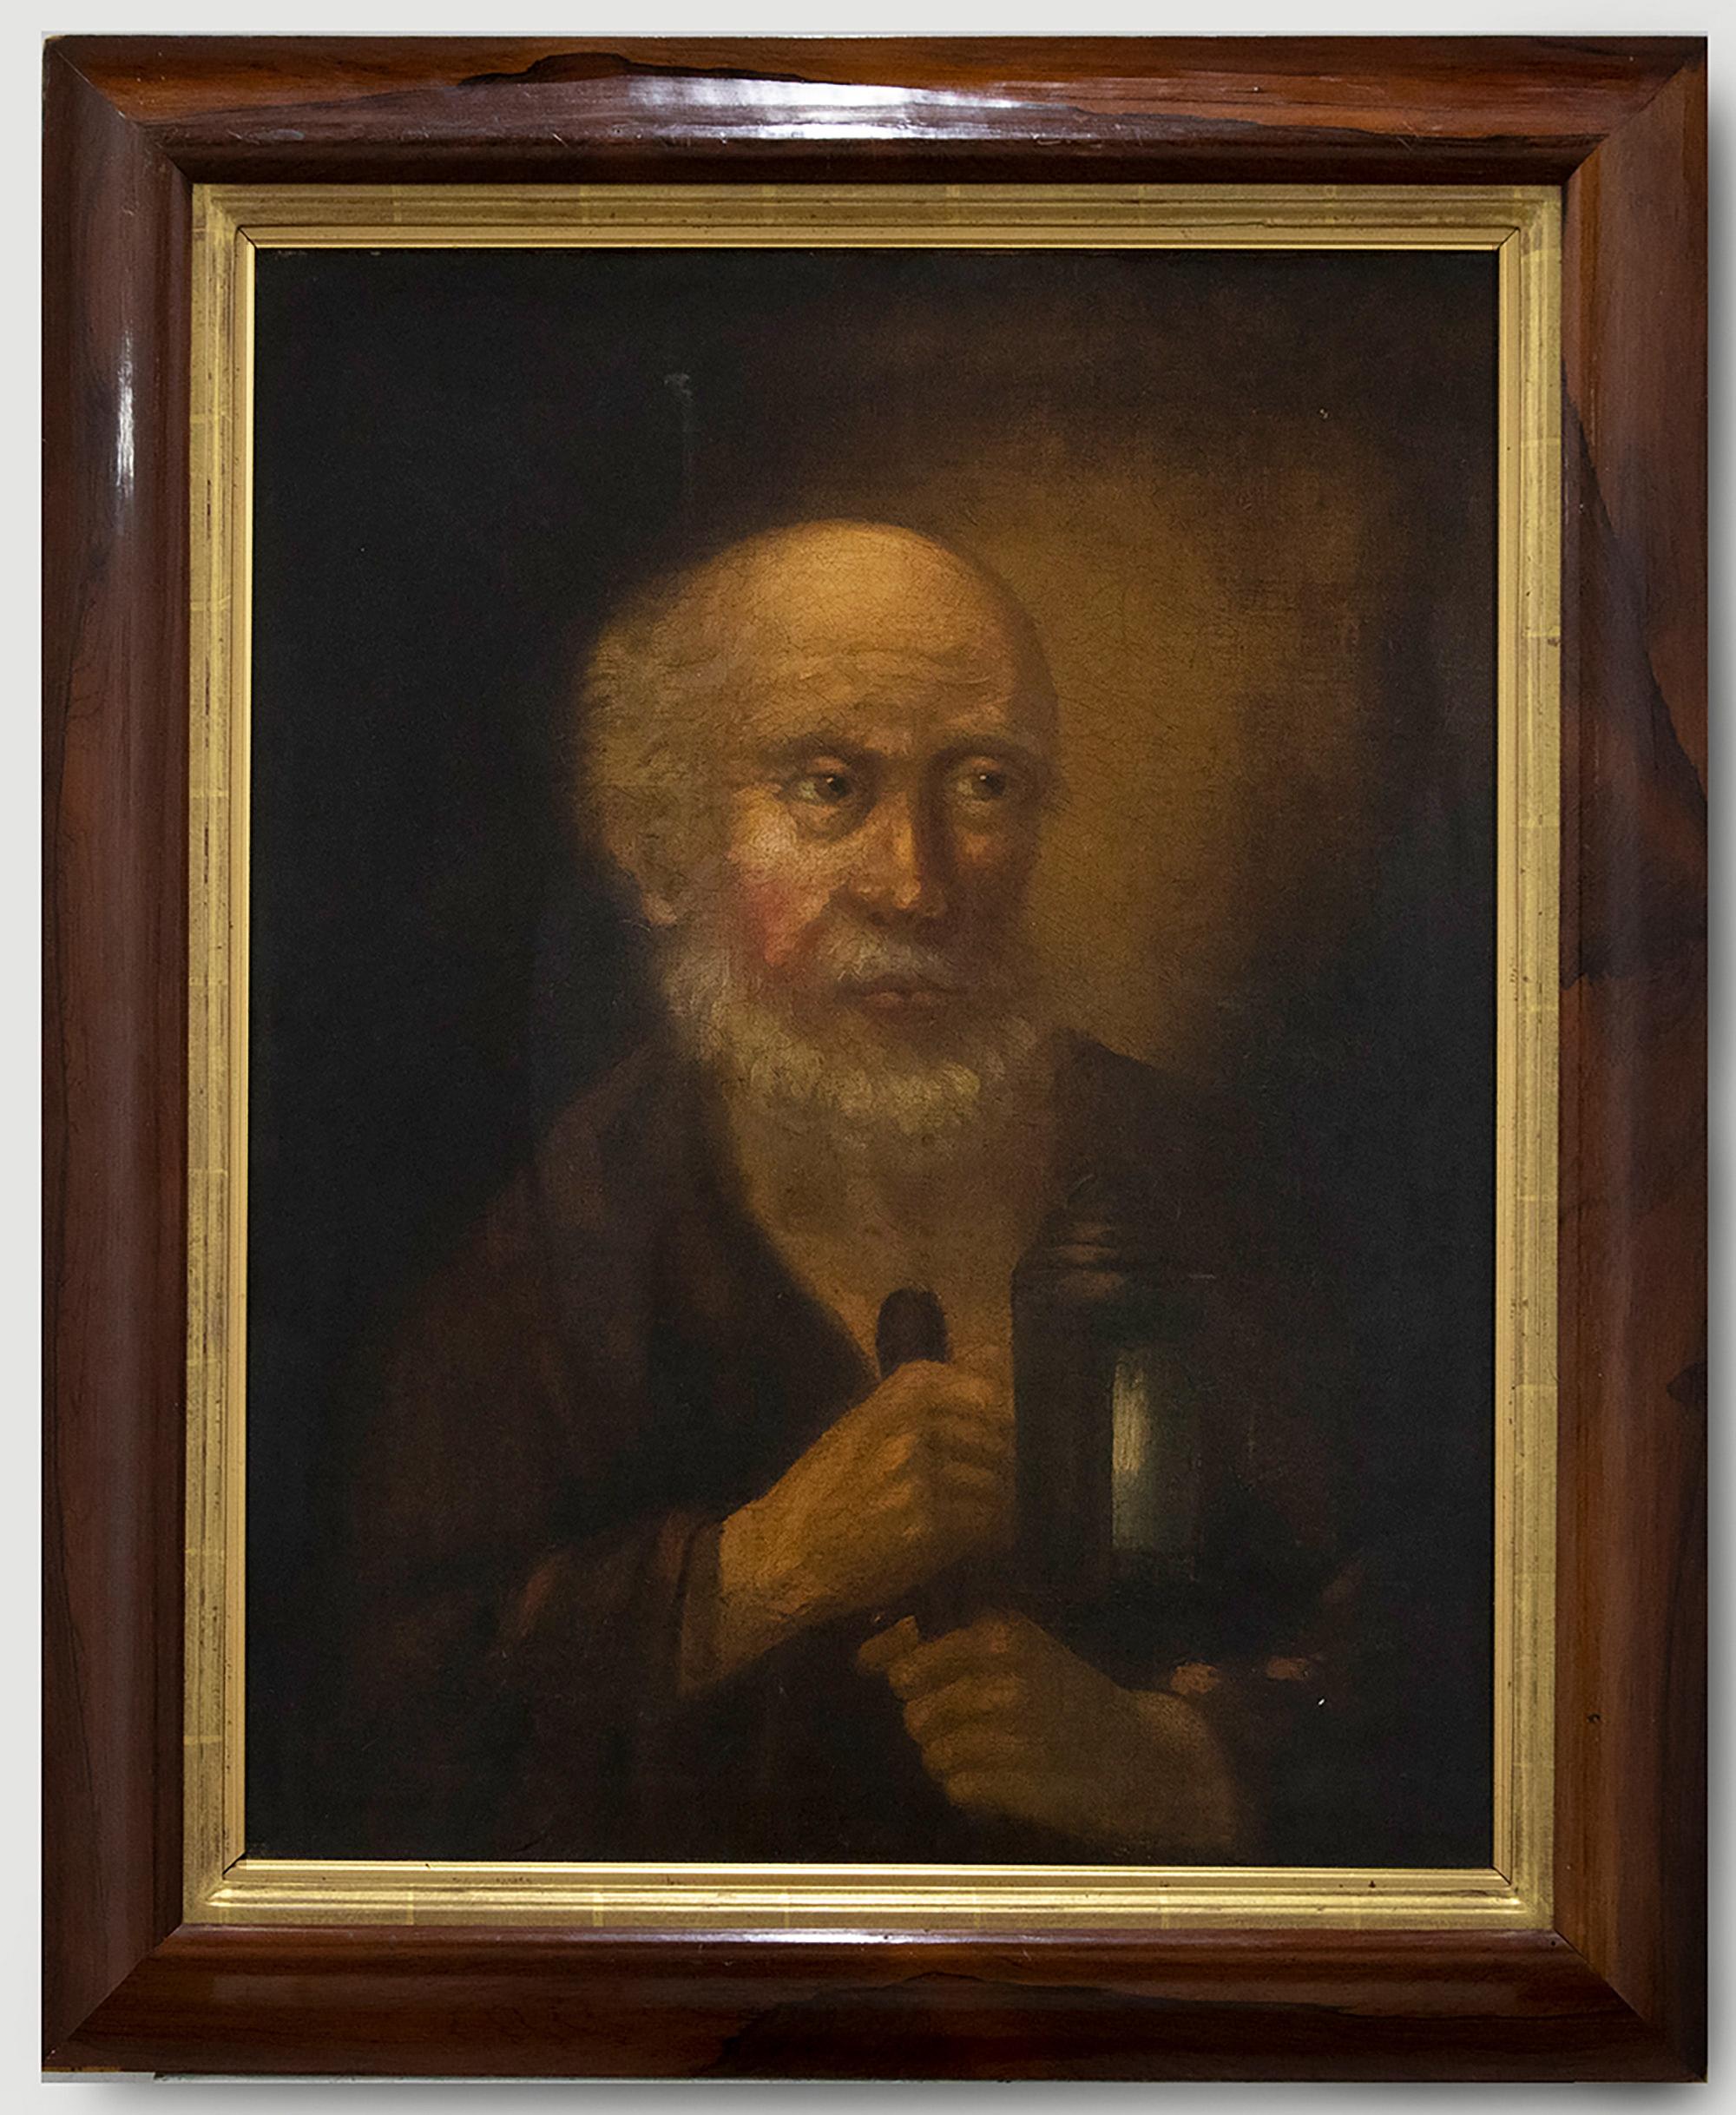 A charming portrait study of a bearded monk holding a lamp. His face is illuminated against the background making for an atmospheric scene. Unsigned. Presented in a wooden frame with a gilt slip. On canvas.